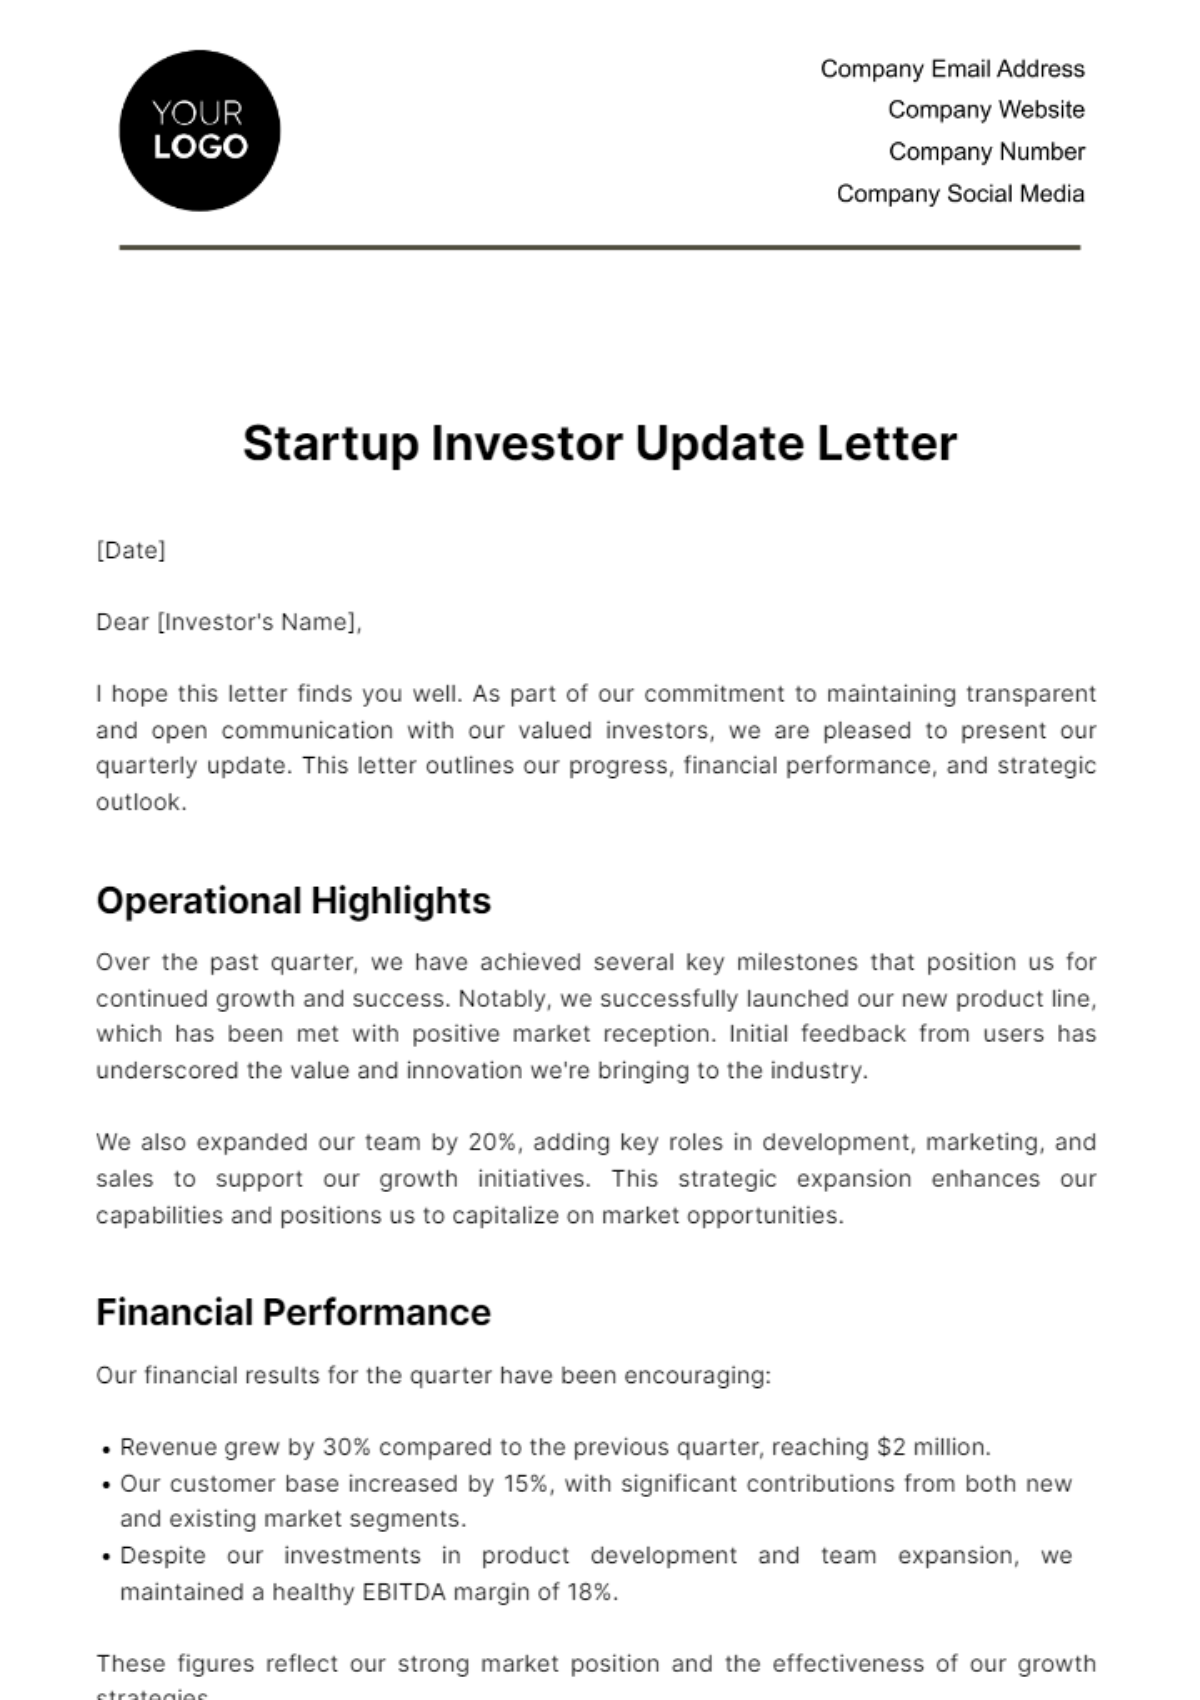 Free Startup Investor Update Letter Template